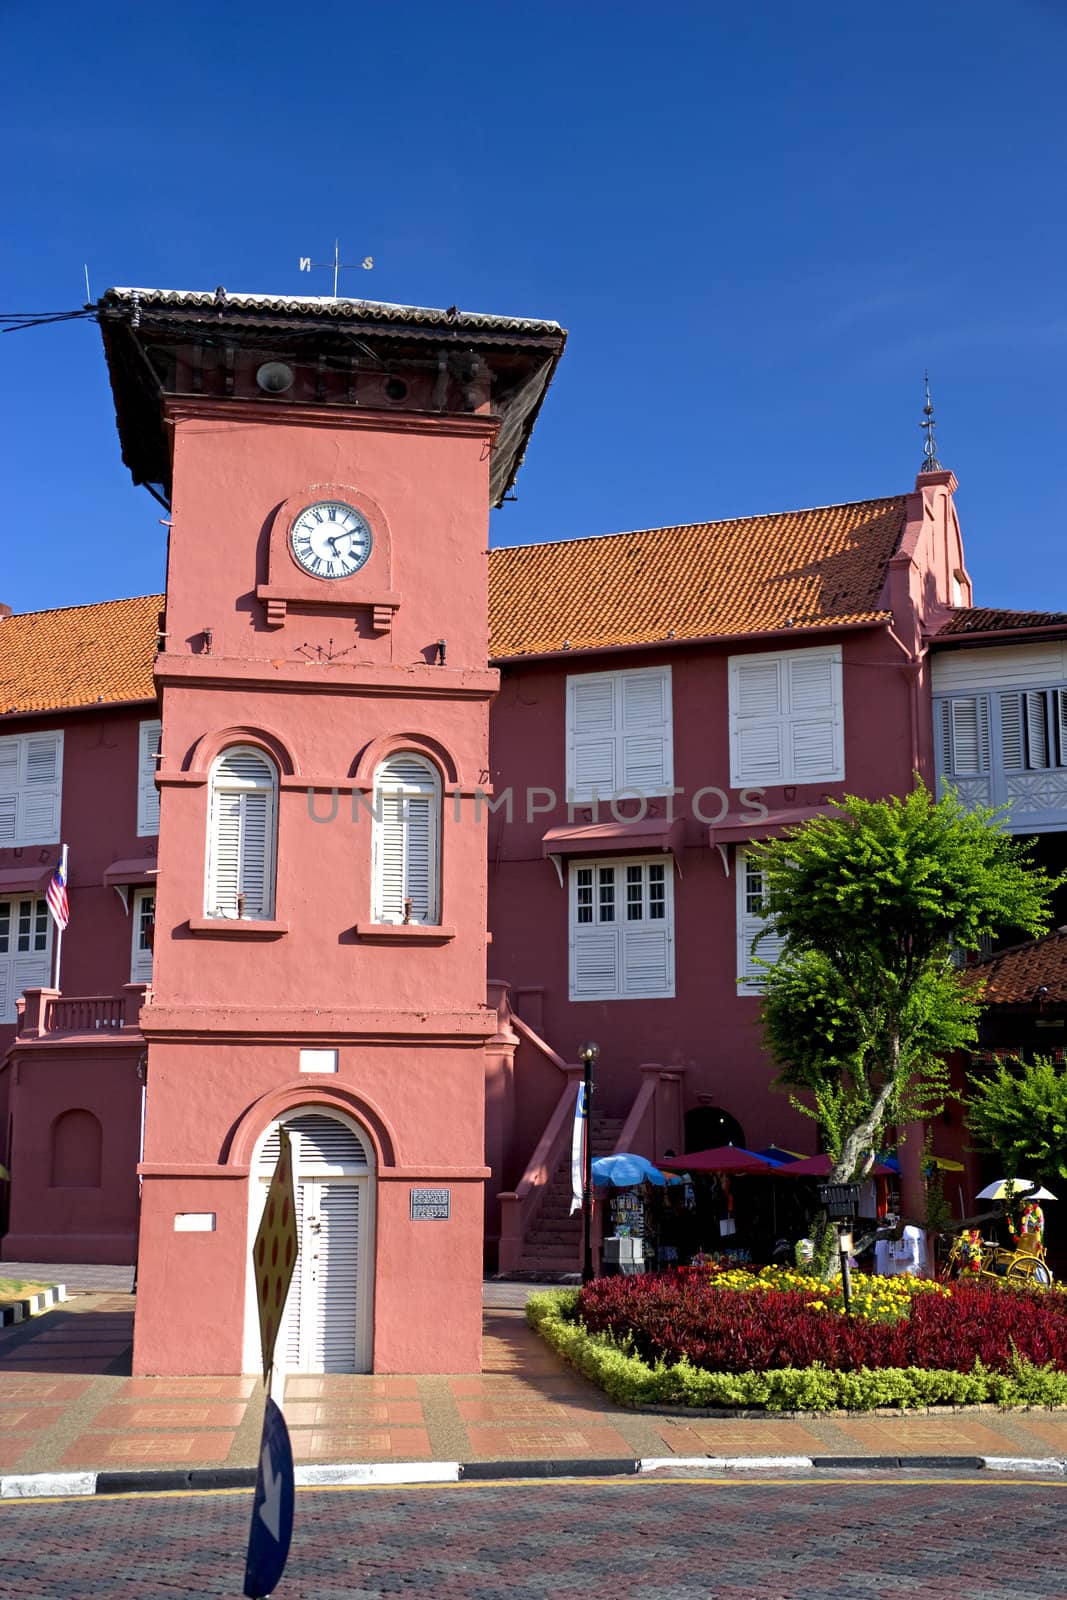 Dutch era clock tower built in the 18th century, located at the UNESCO World Heritage site of Malacca, Malaysia.